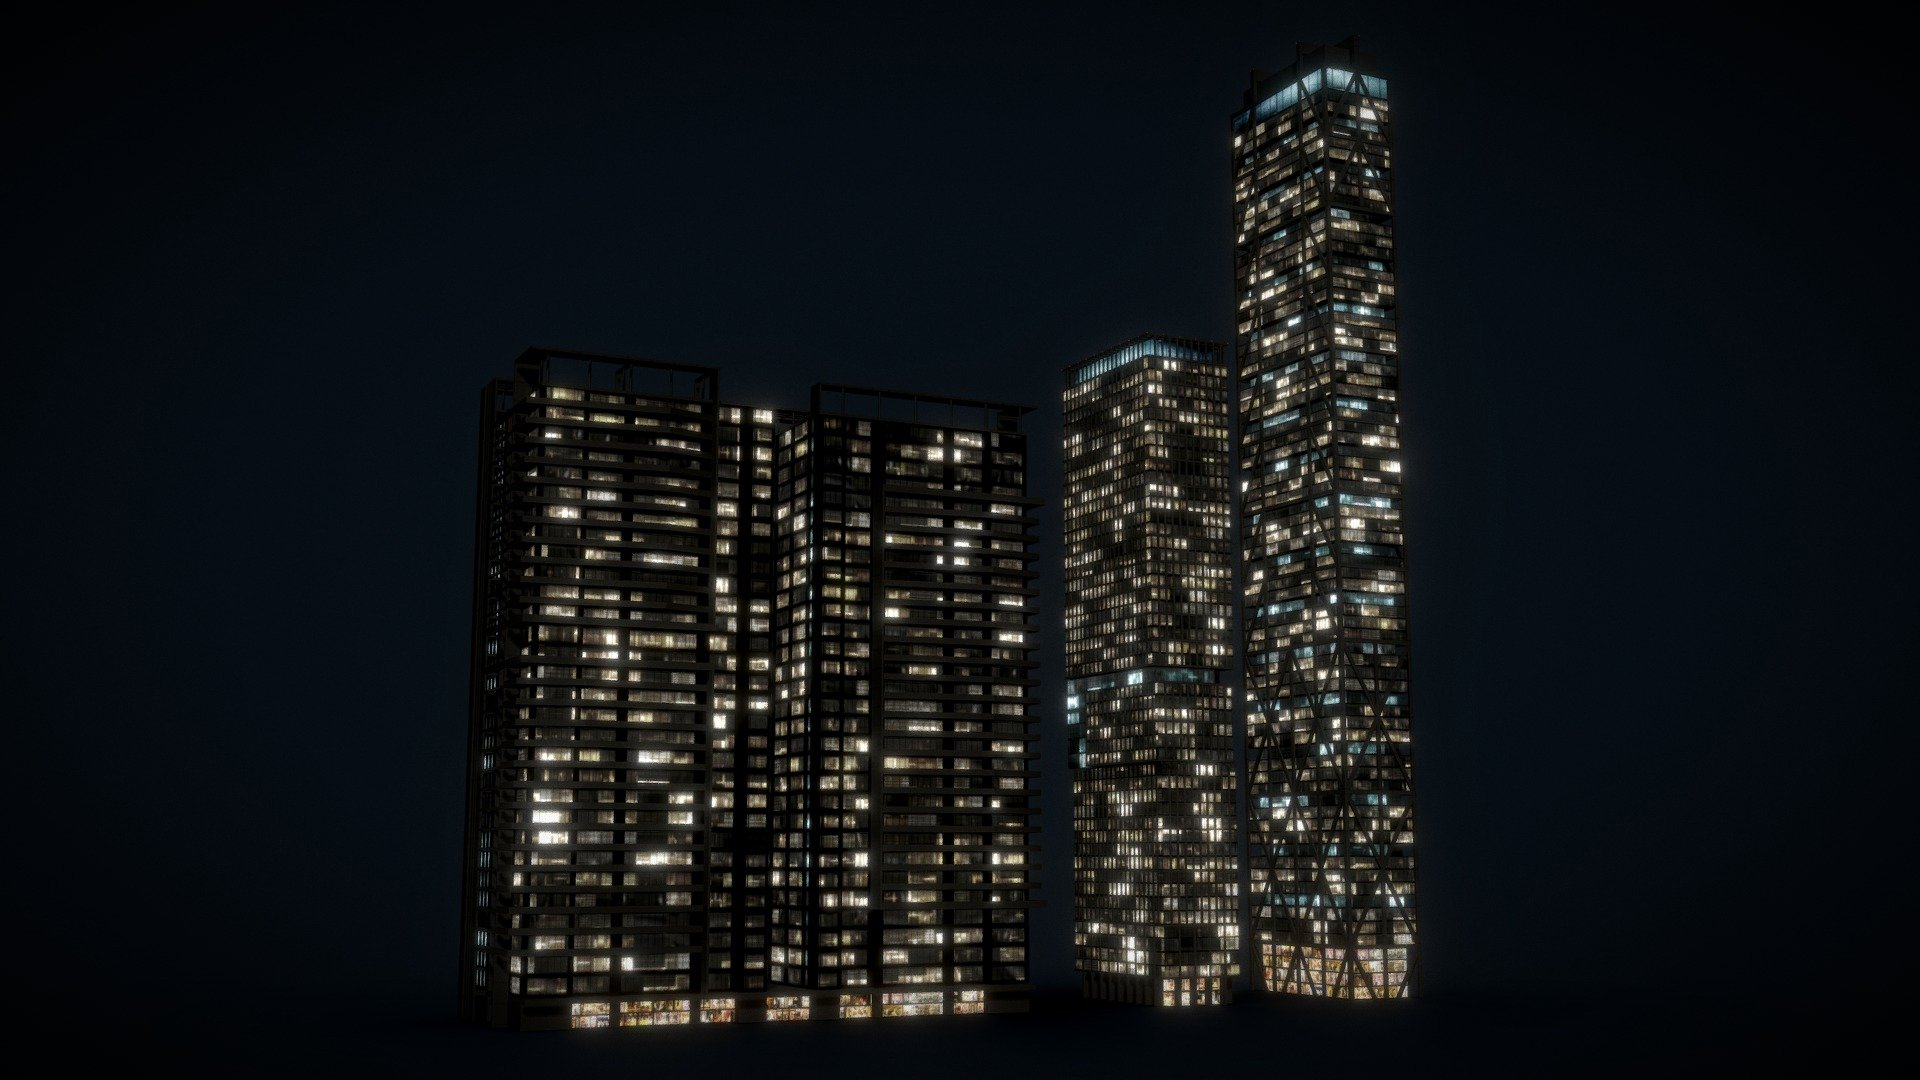 Can be used in Real-time, mobile games, VR/AR, Game Engines, Visualization projects.

Optimized for medium and far views

PBR Textures

You can find this 3d models on CGTrater store (Search &ldquo;apartment building day and night